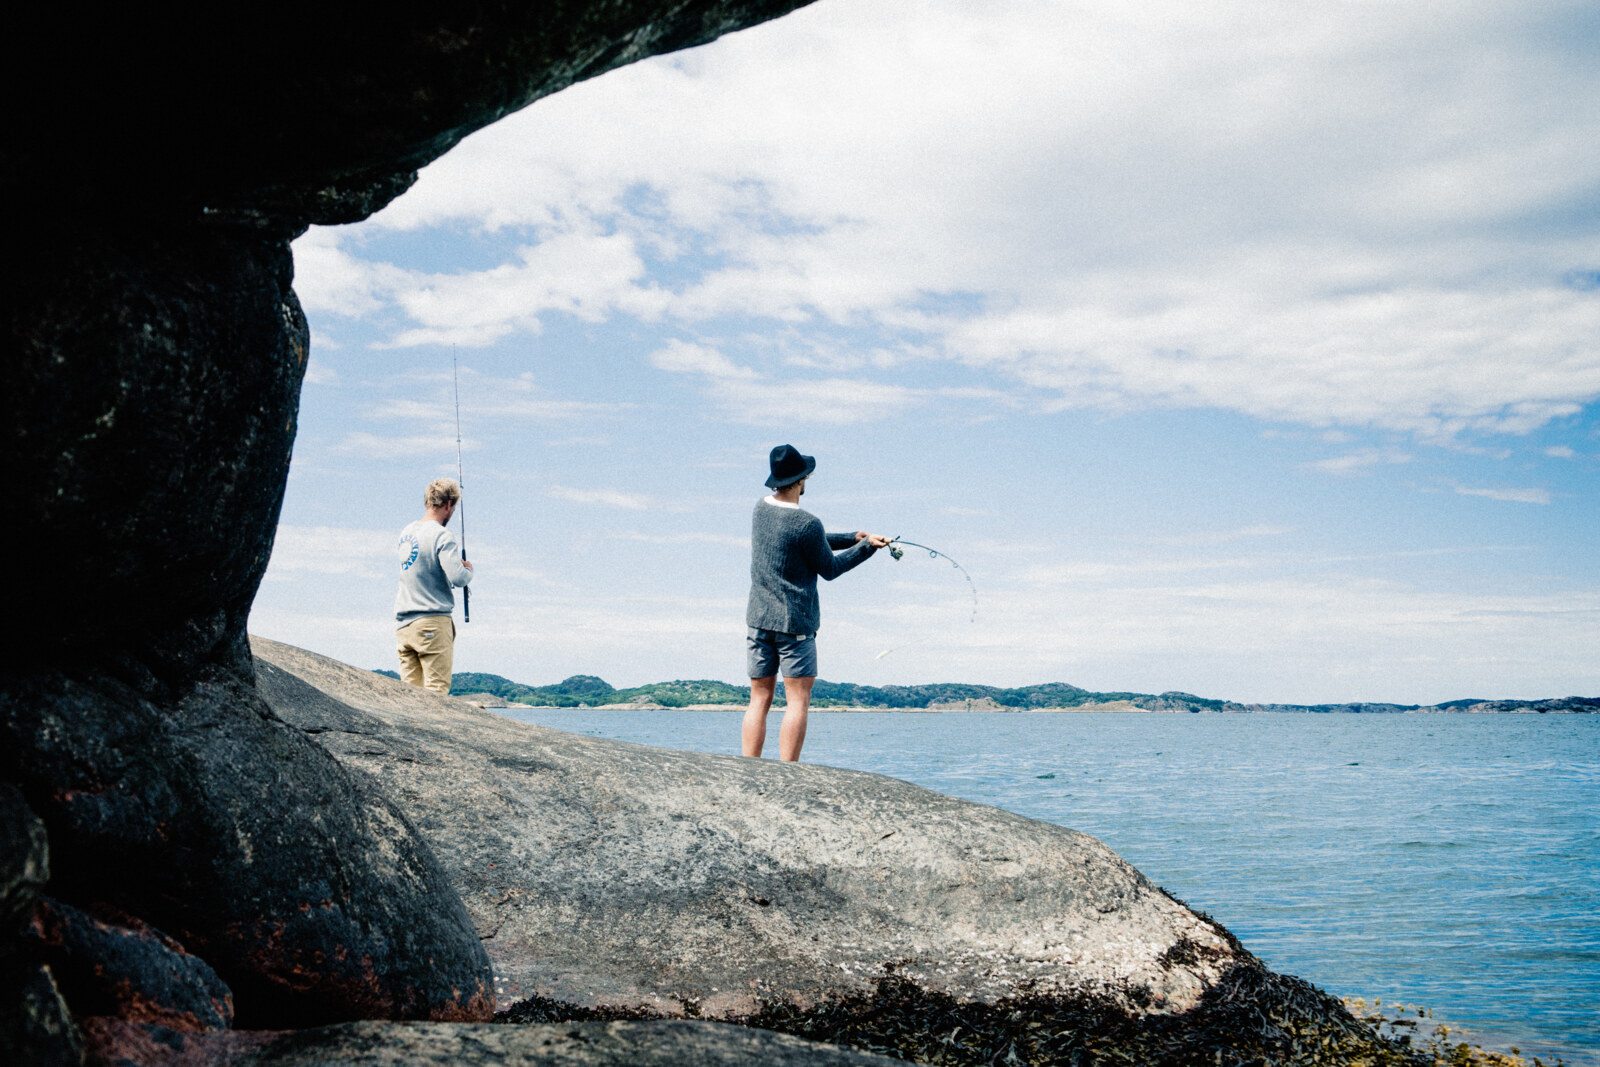 Fishing in the archipelago